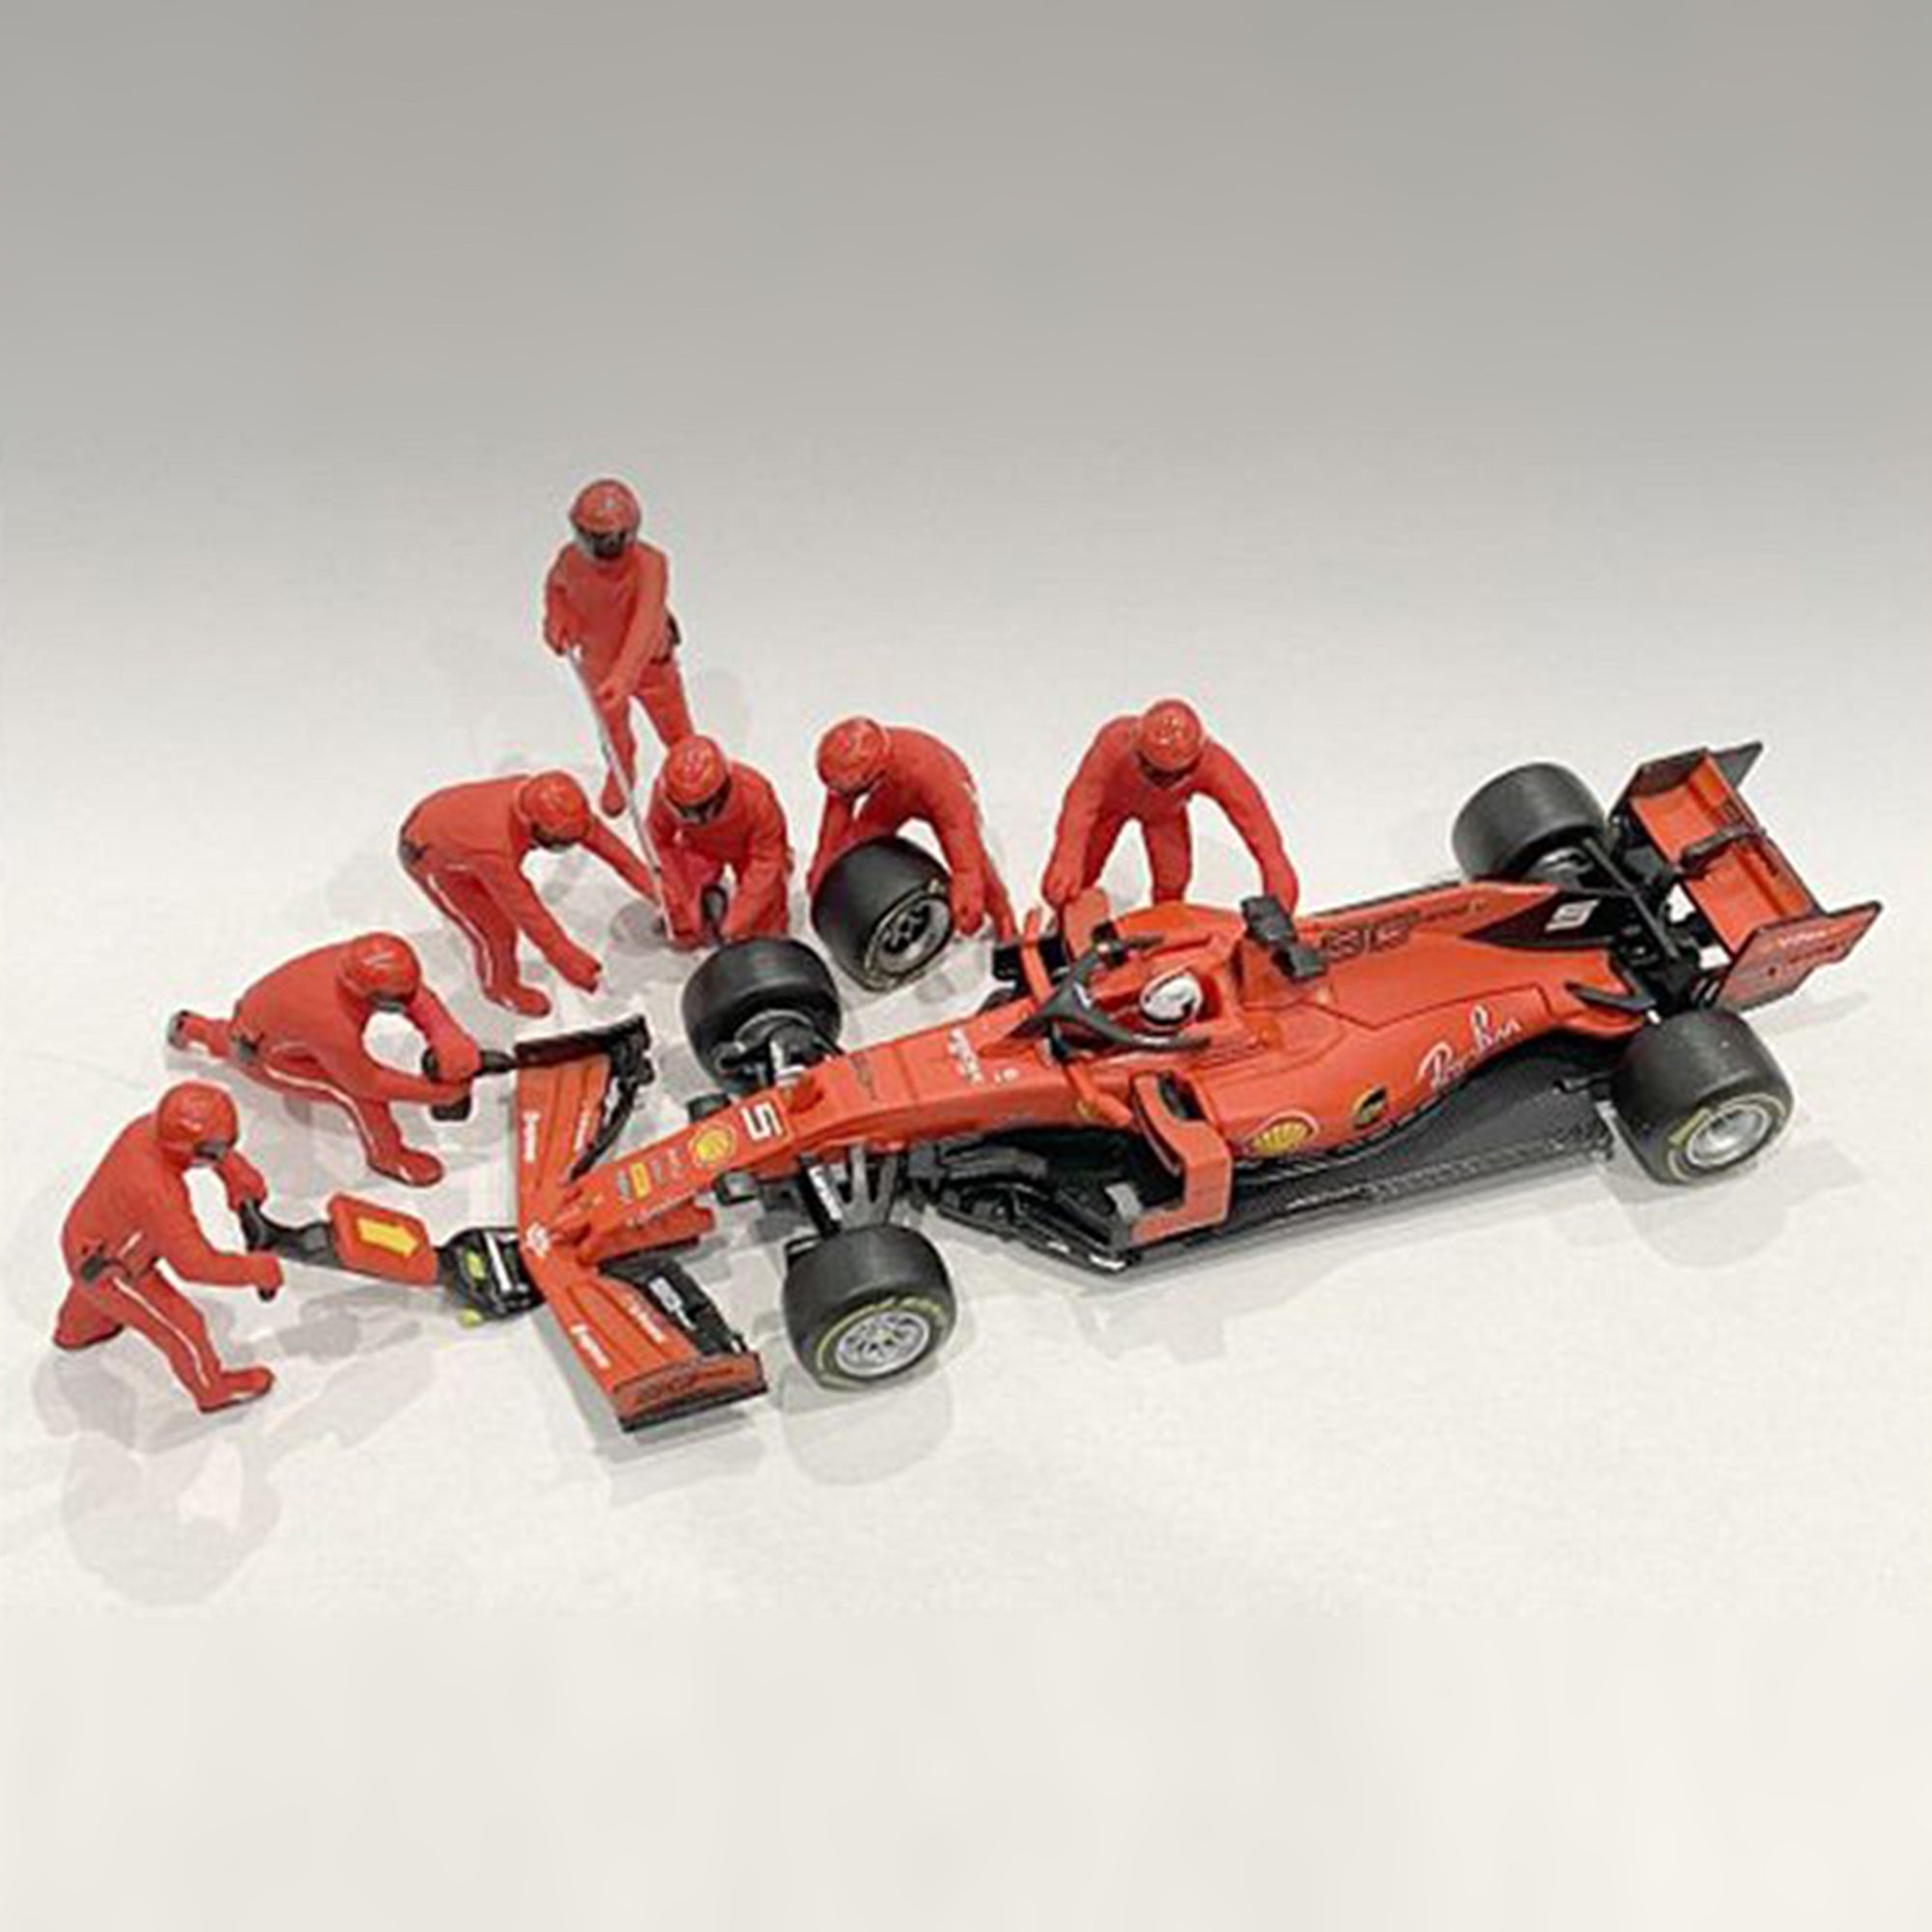 American Dioramas F1 Red Team Pit Crew Figures 1:43 Diecast Model